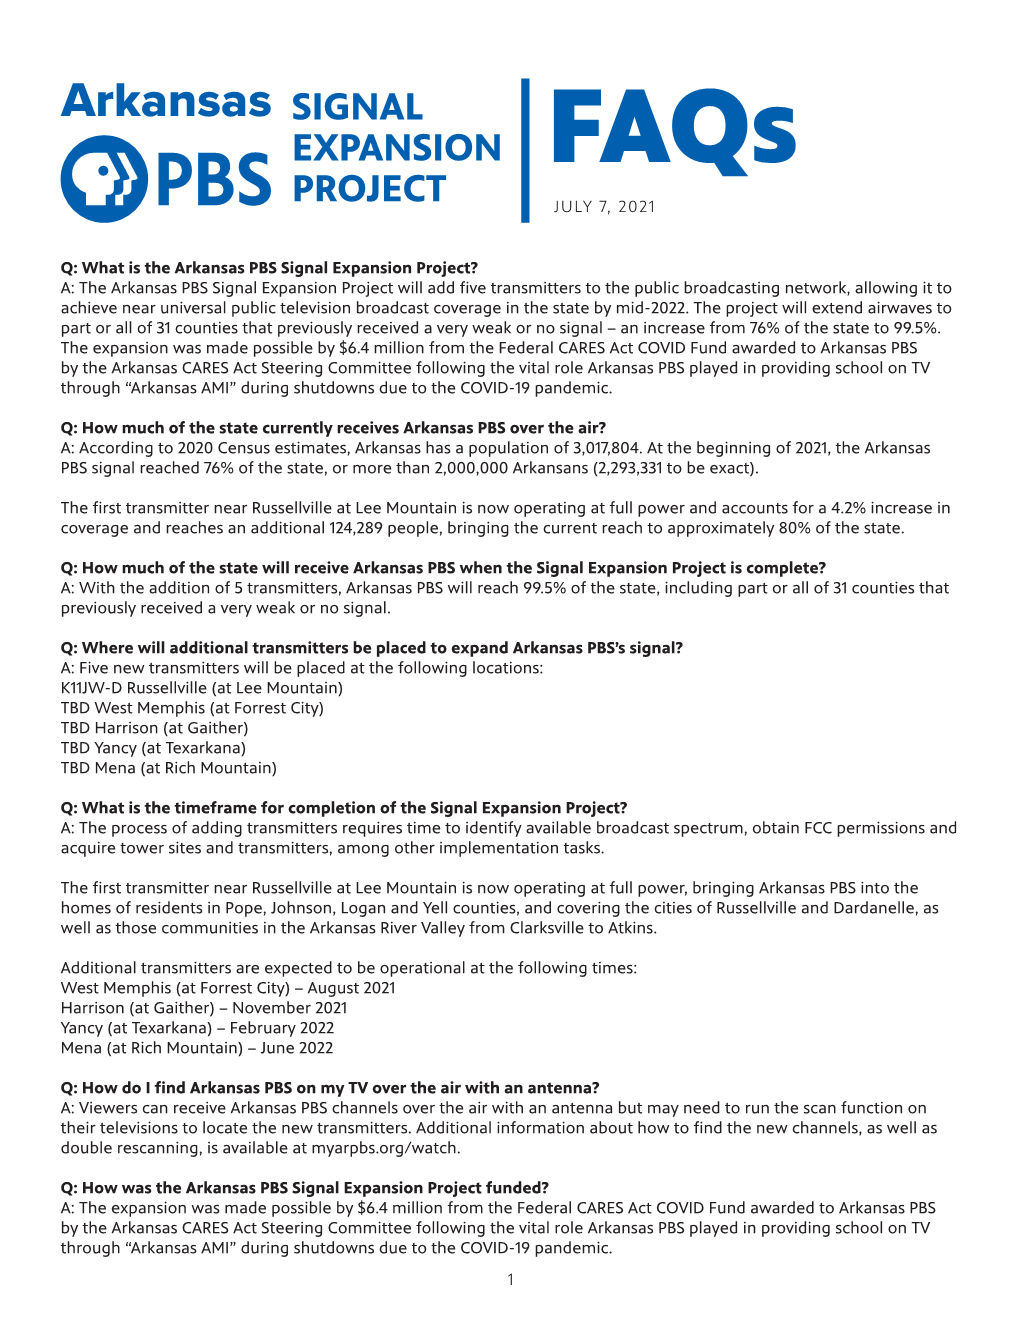 Q: What Is the Arkansas PBS Signal Expansion Project?